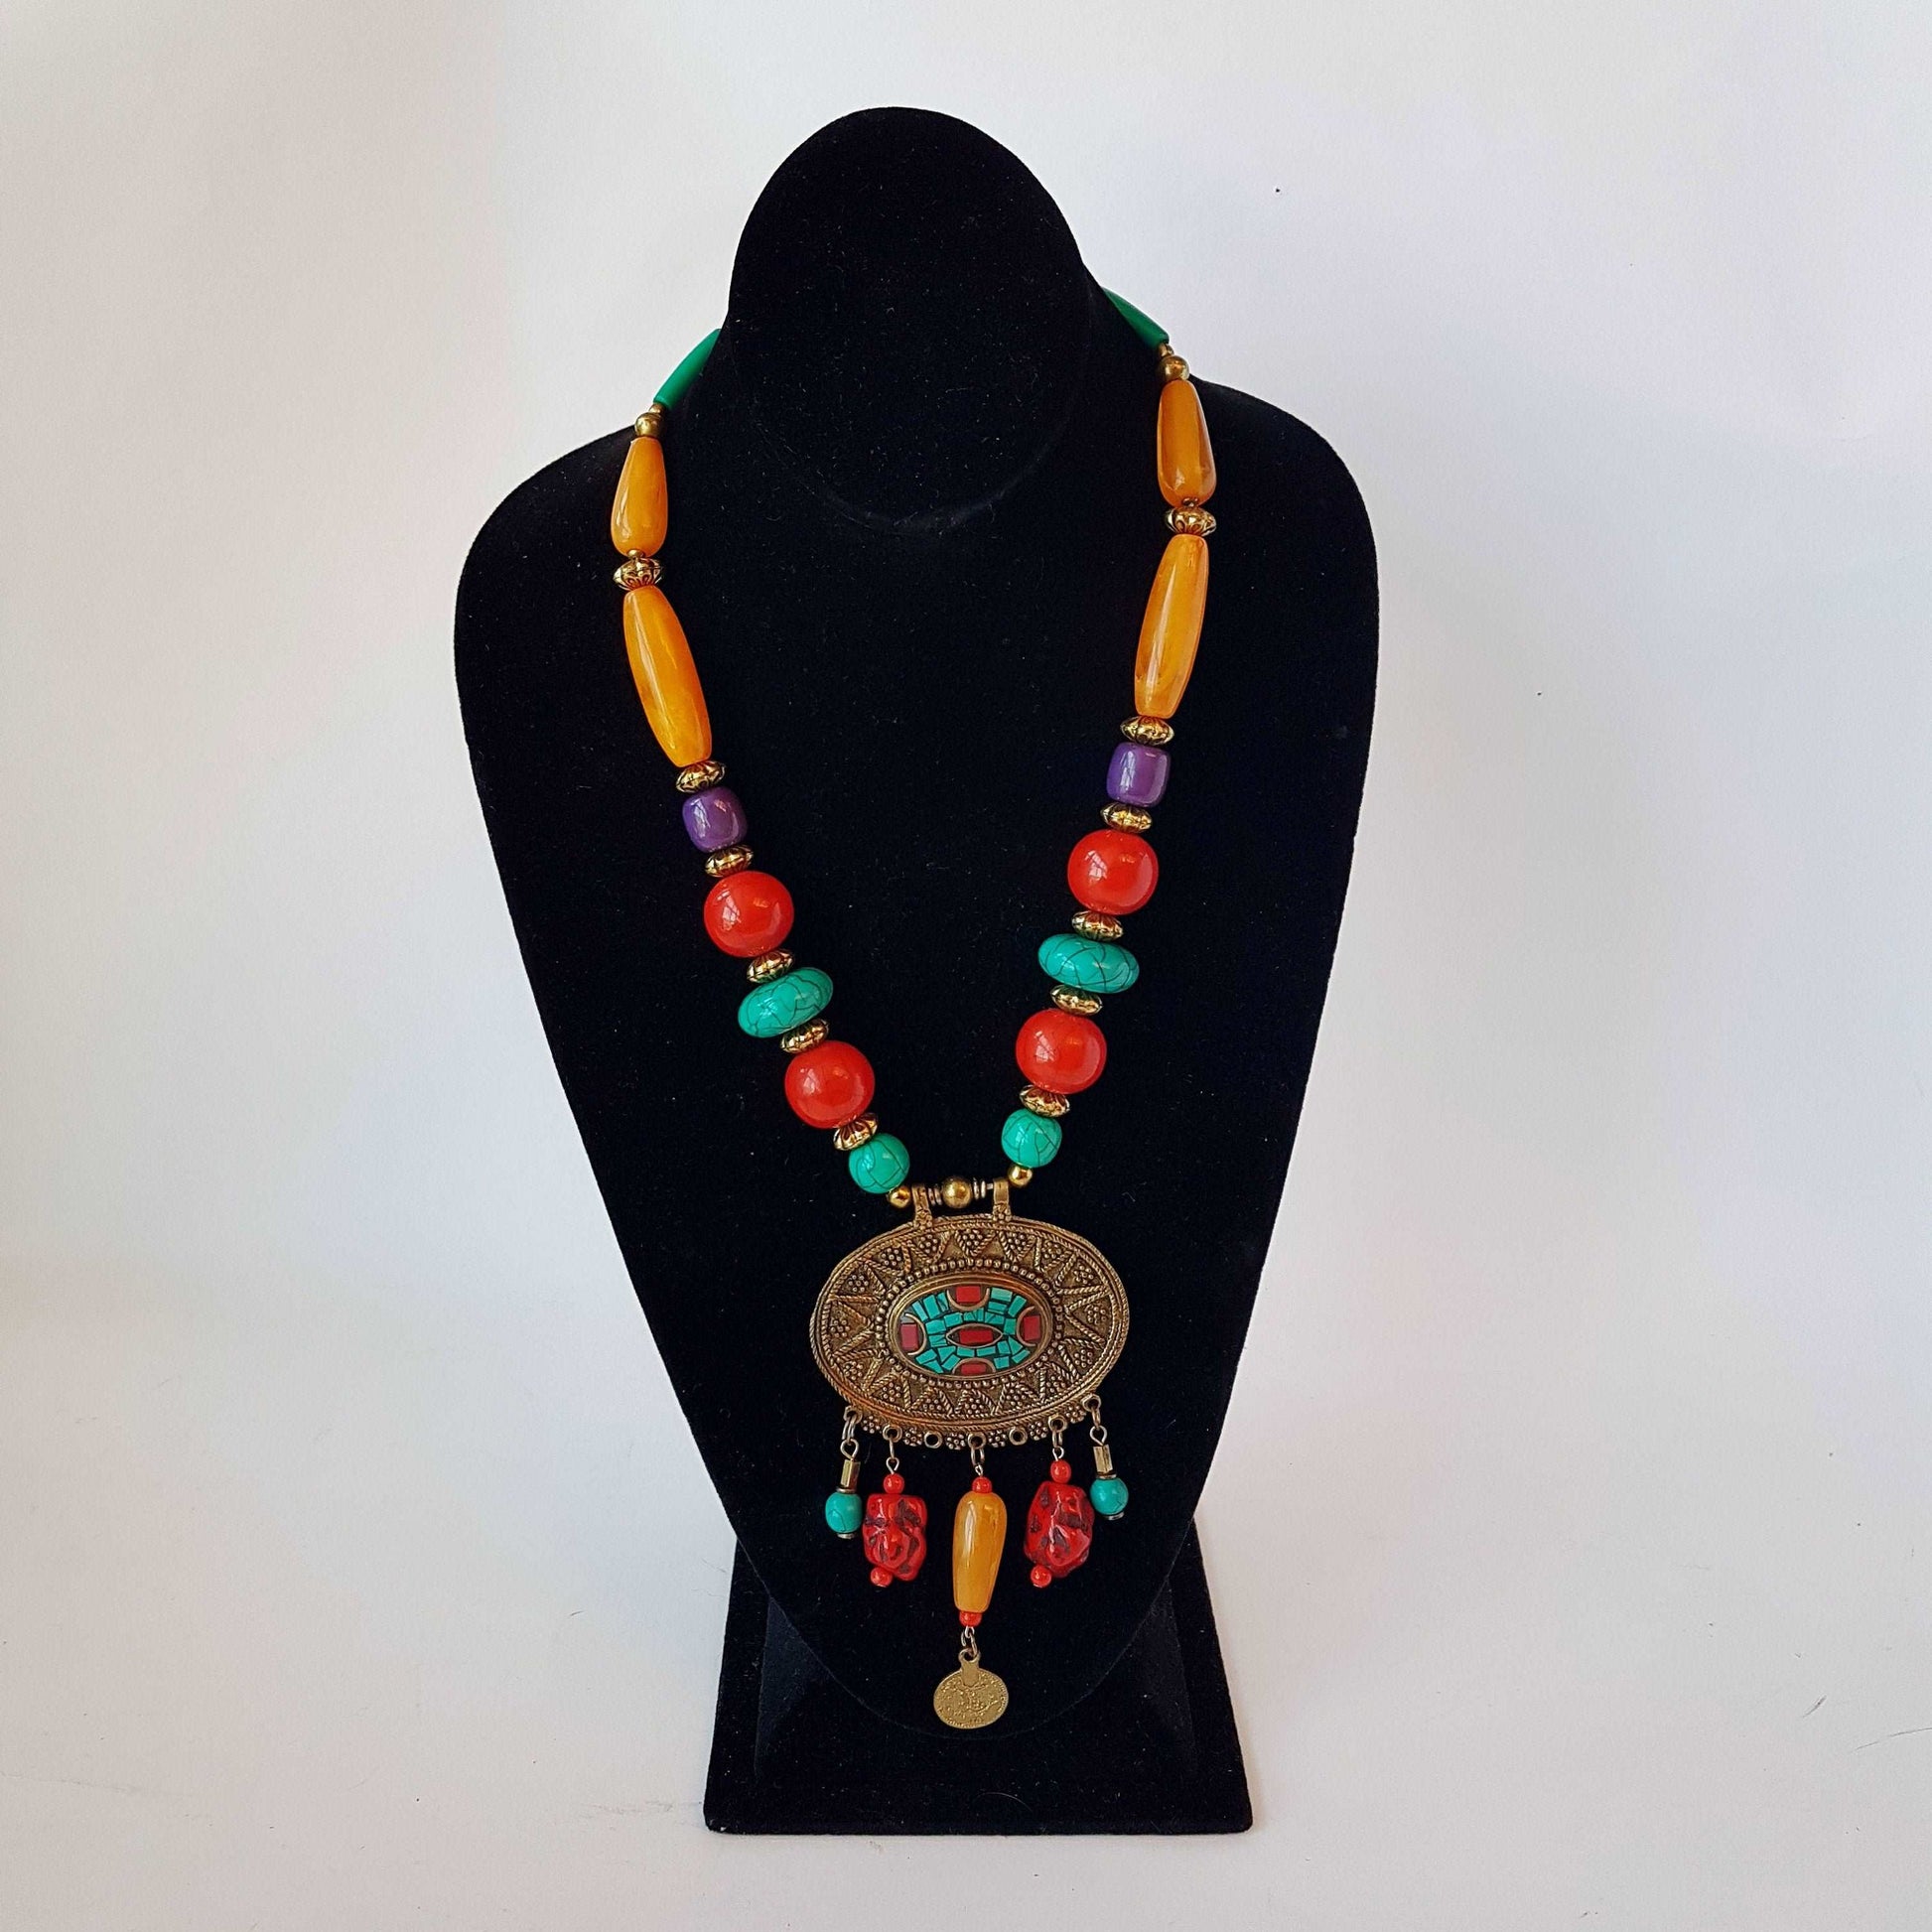 Bohemian designer necklace with amber turquoise and coral beads. Vintage feel embossed bronze metal pendant. Impressive colorful piece. - Vintage India Ca